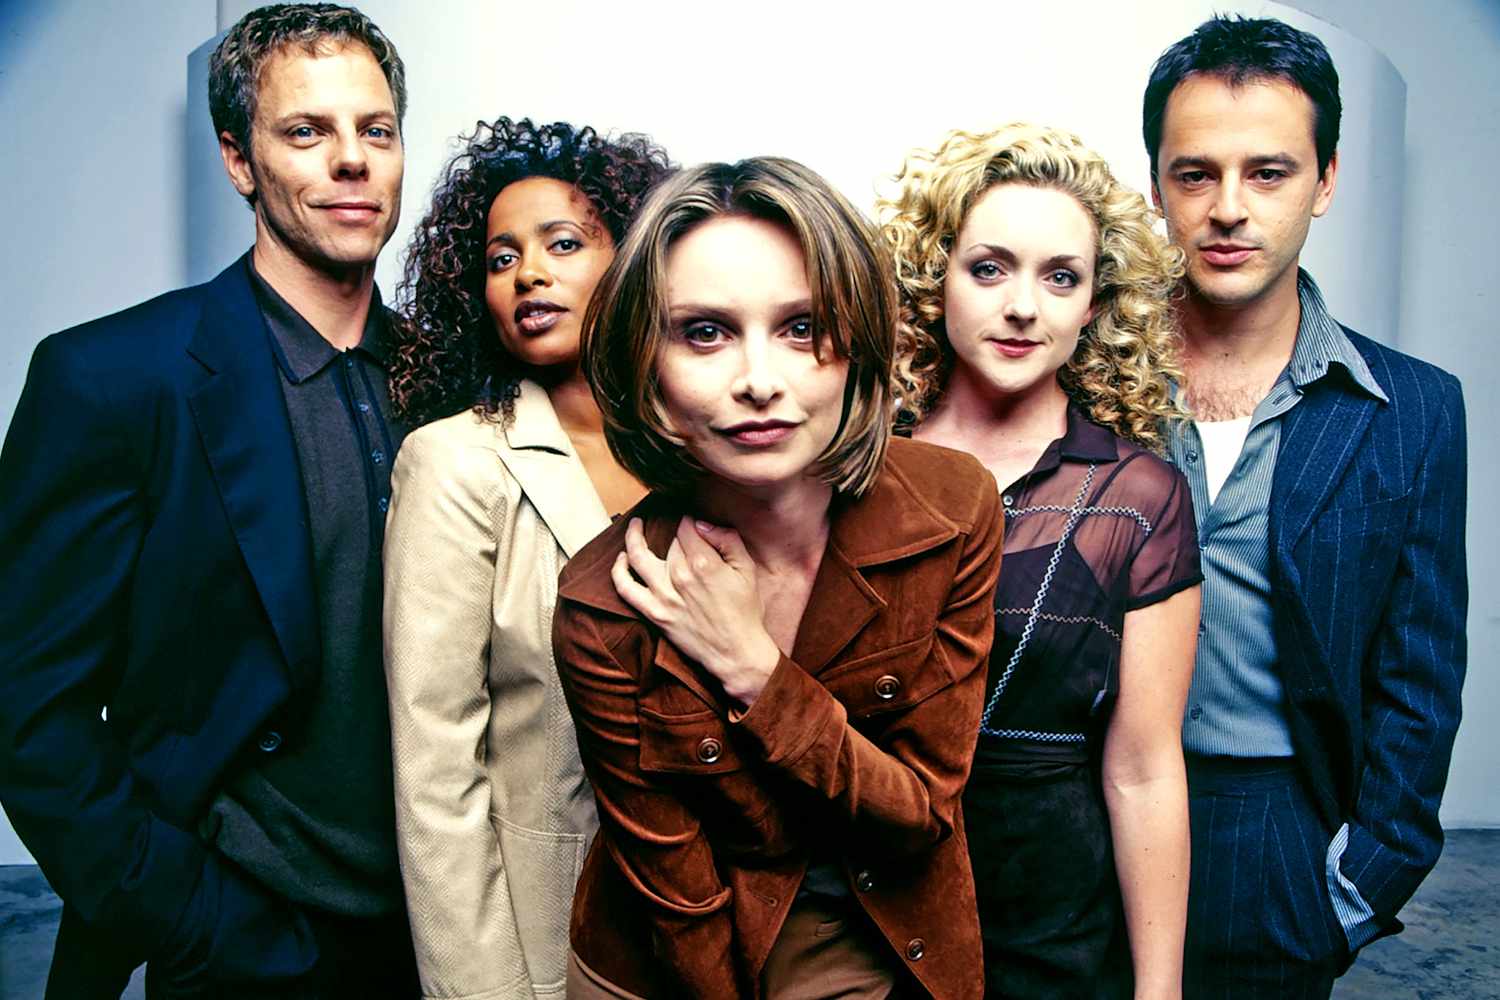 The cast of 'Ally McBeal'